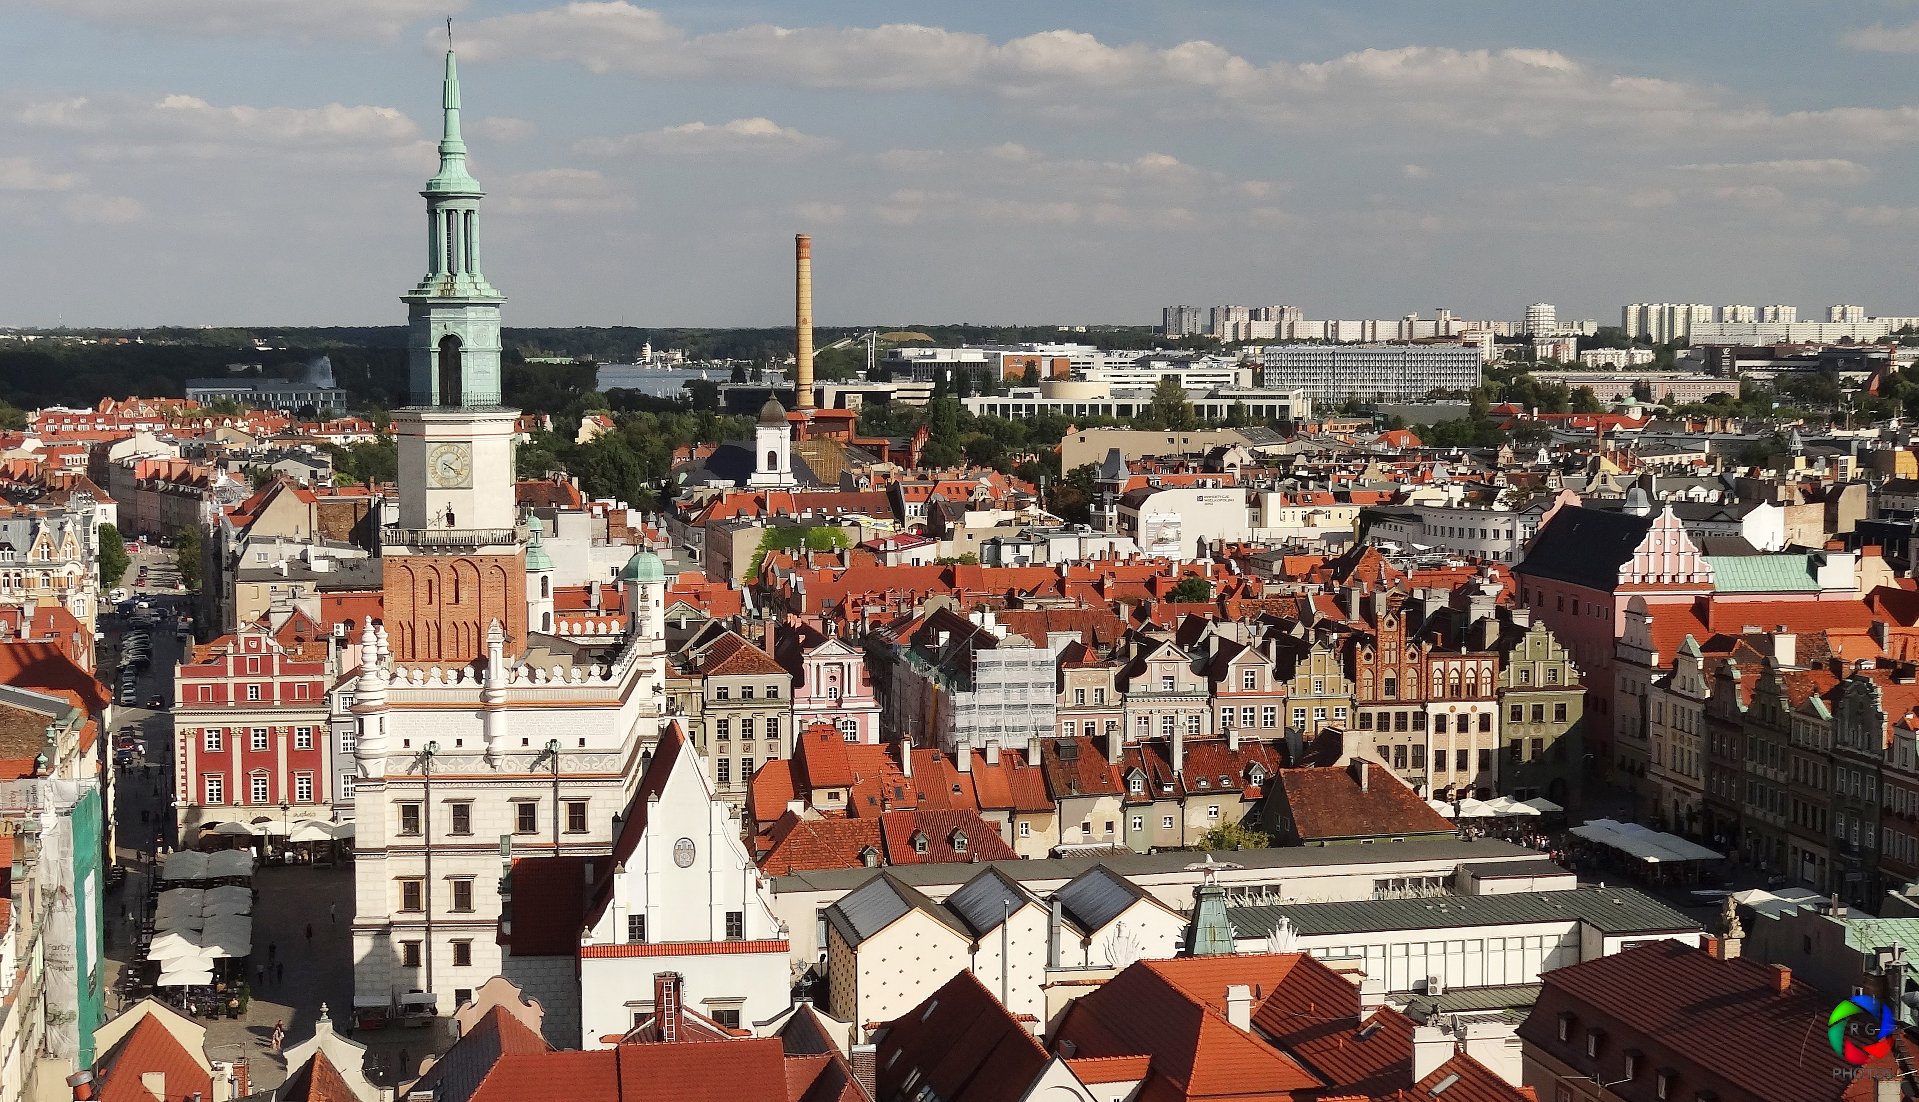 Picture of the city, buildings, rooftops. - grafika artykułu